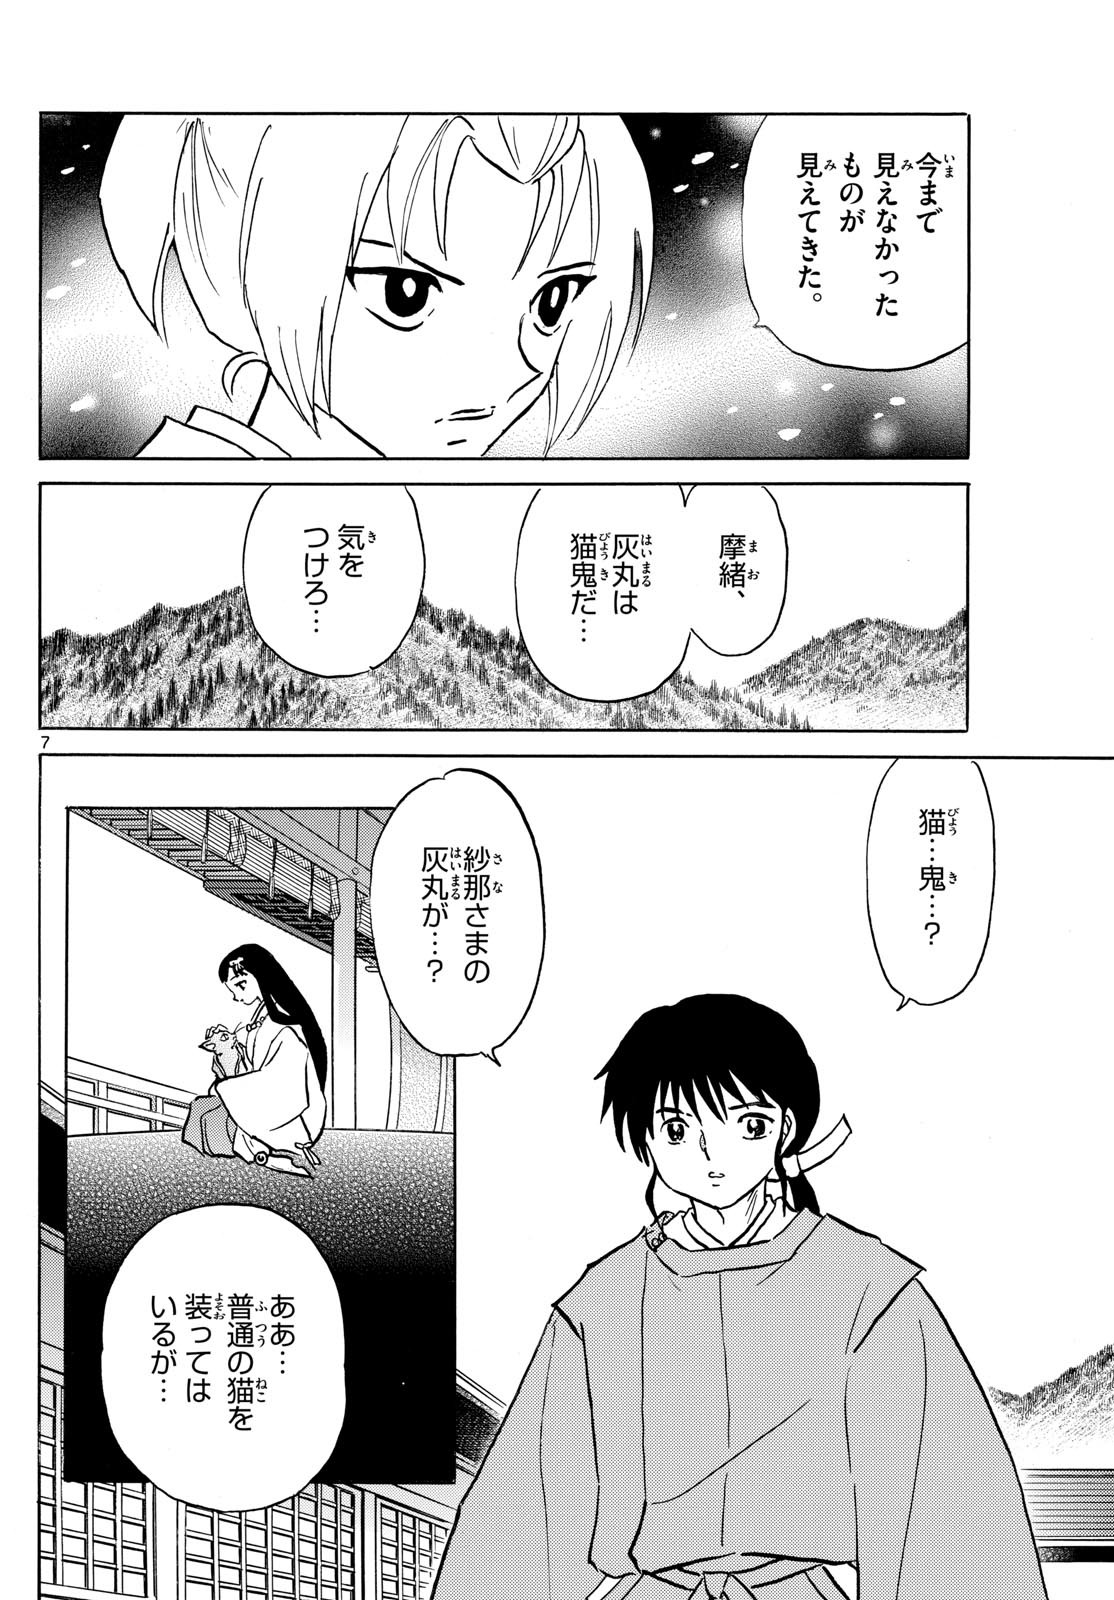 MAO - Chapter 220 - Page 7